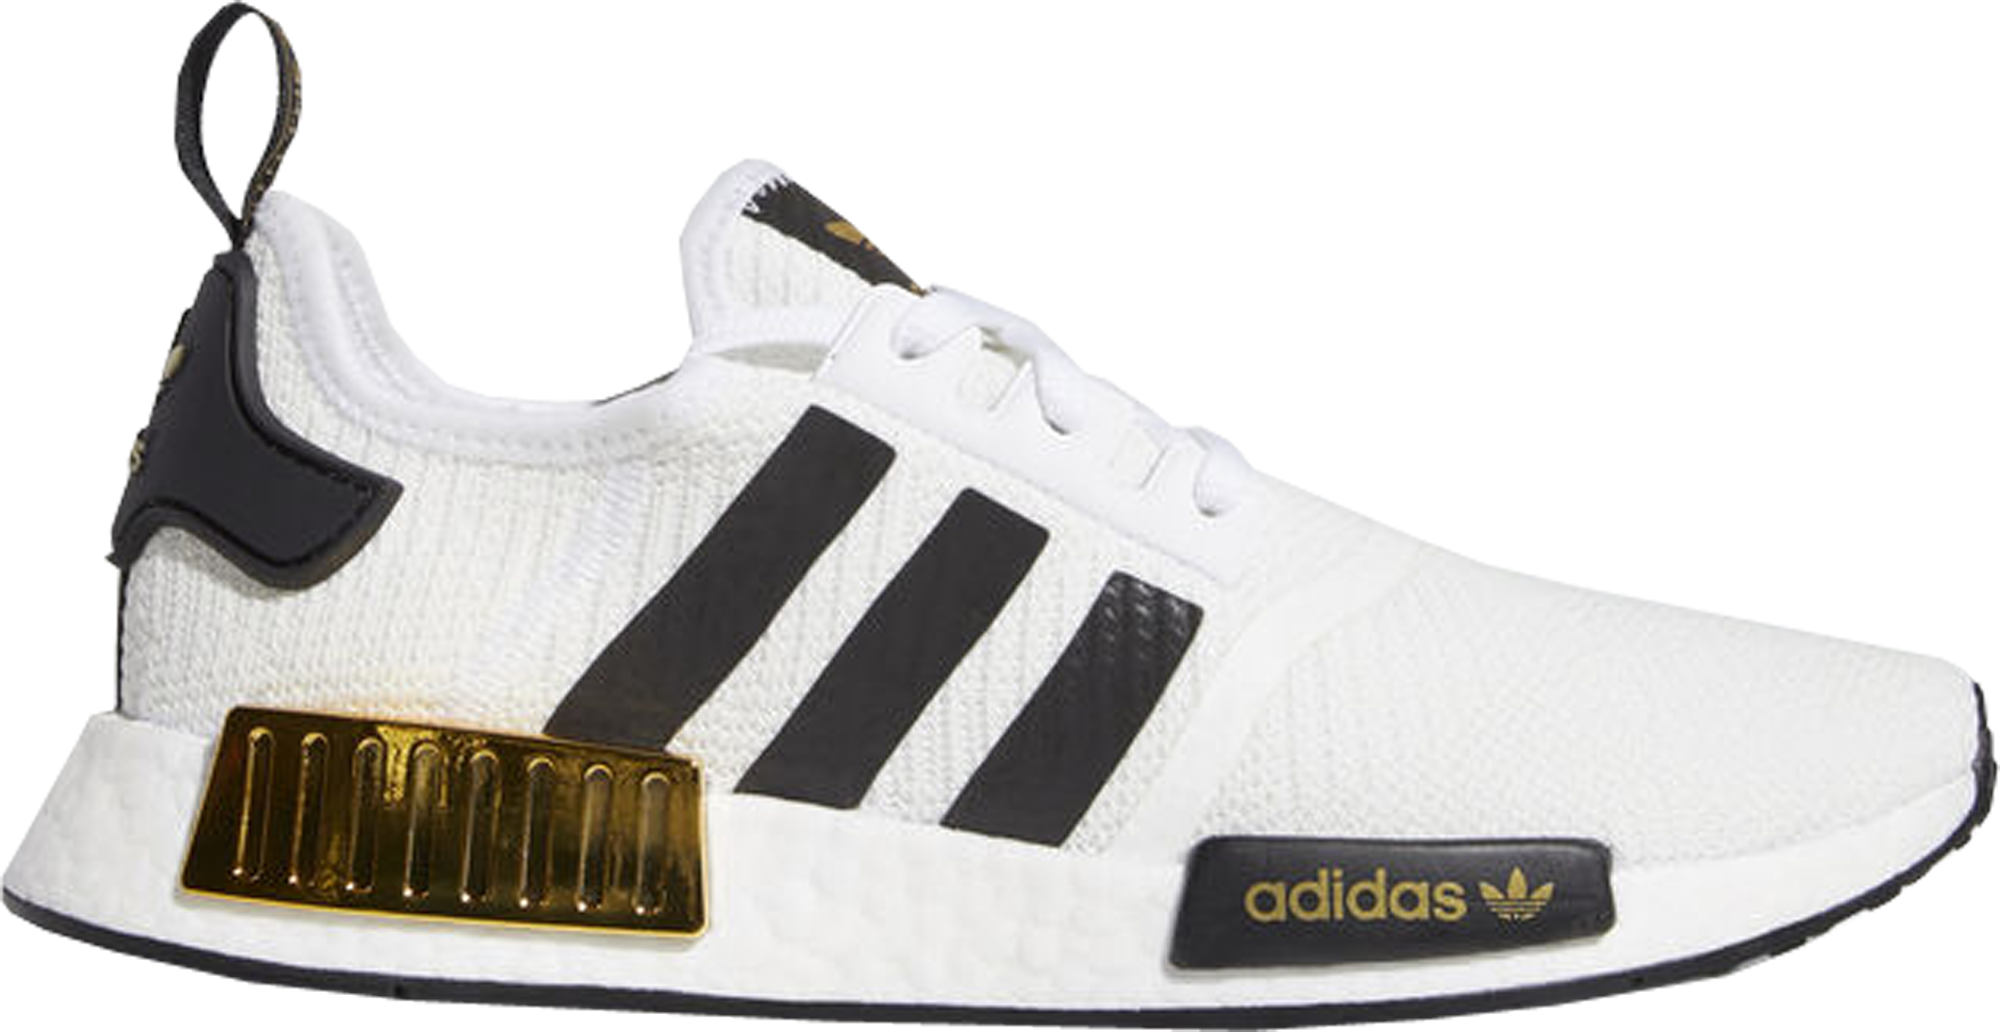 adidas sneakers black and gold